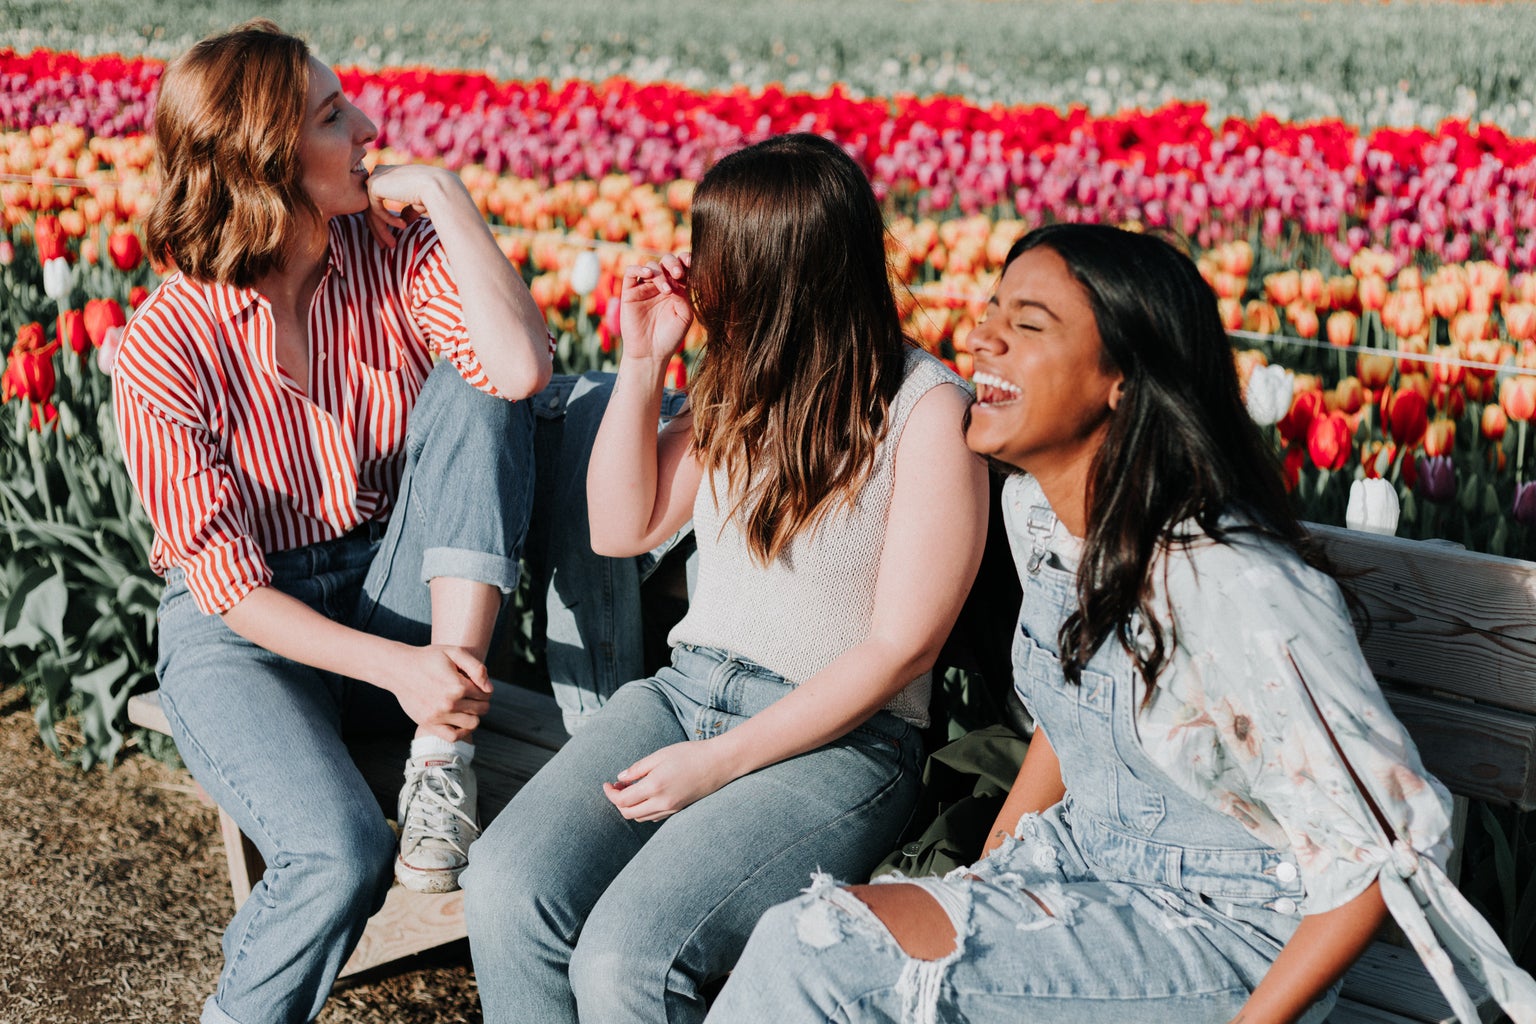 Women laughing together on a bench in front of tulips